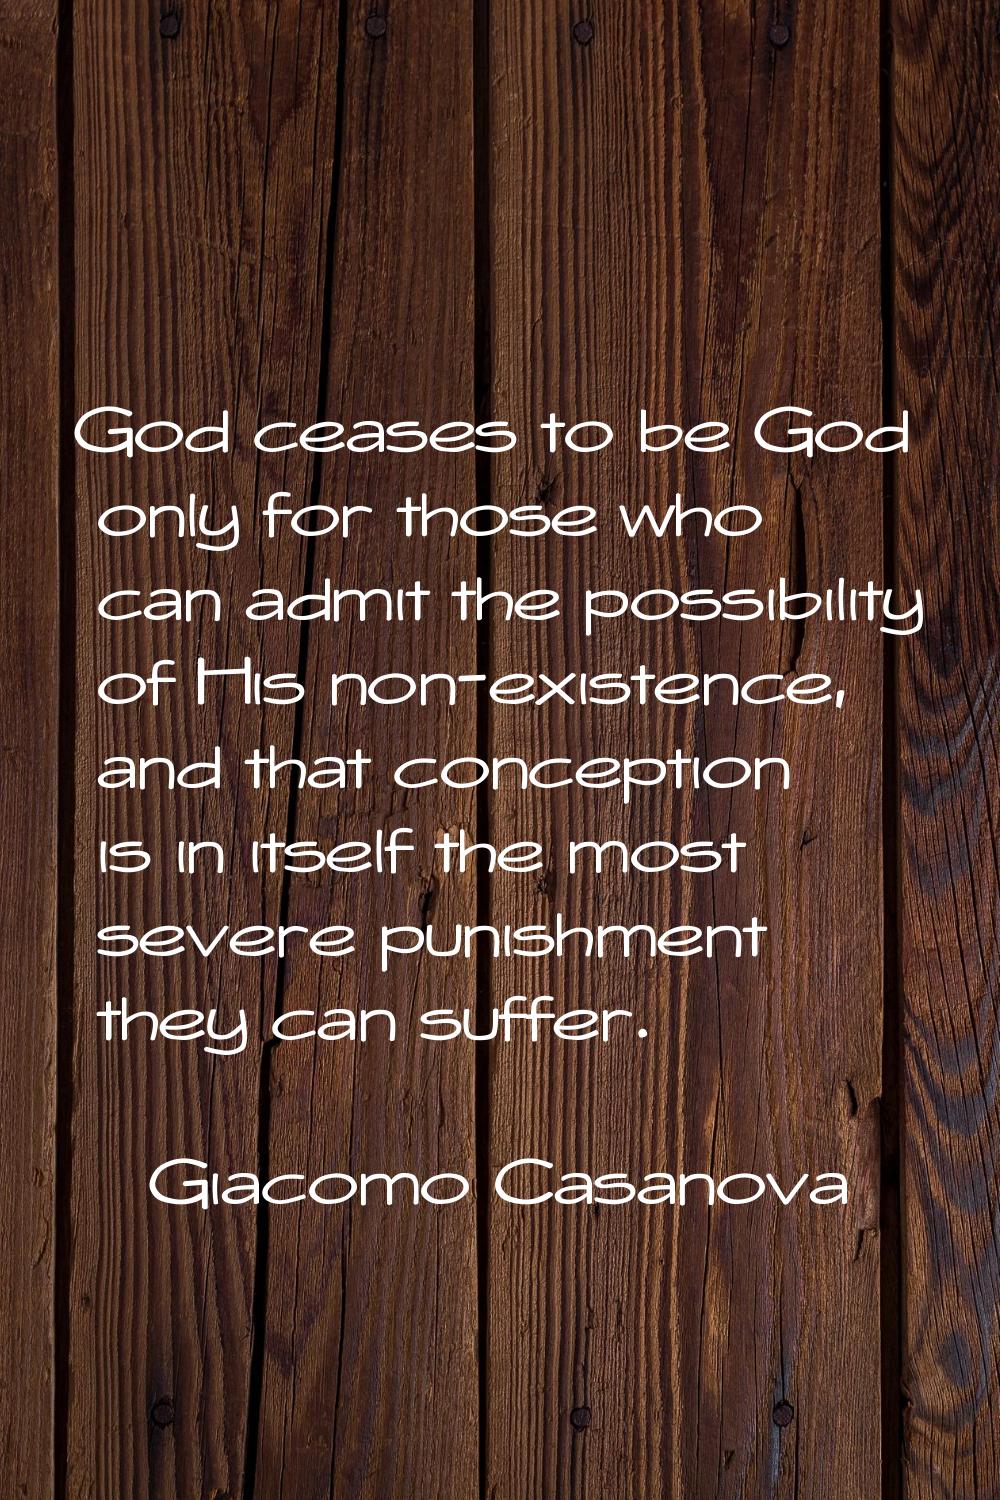 God ceases to be God only for those who can admit the possibility of His non-existence, and that co